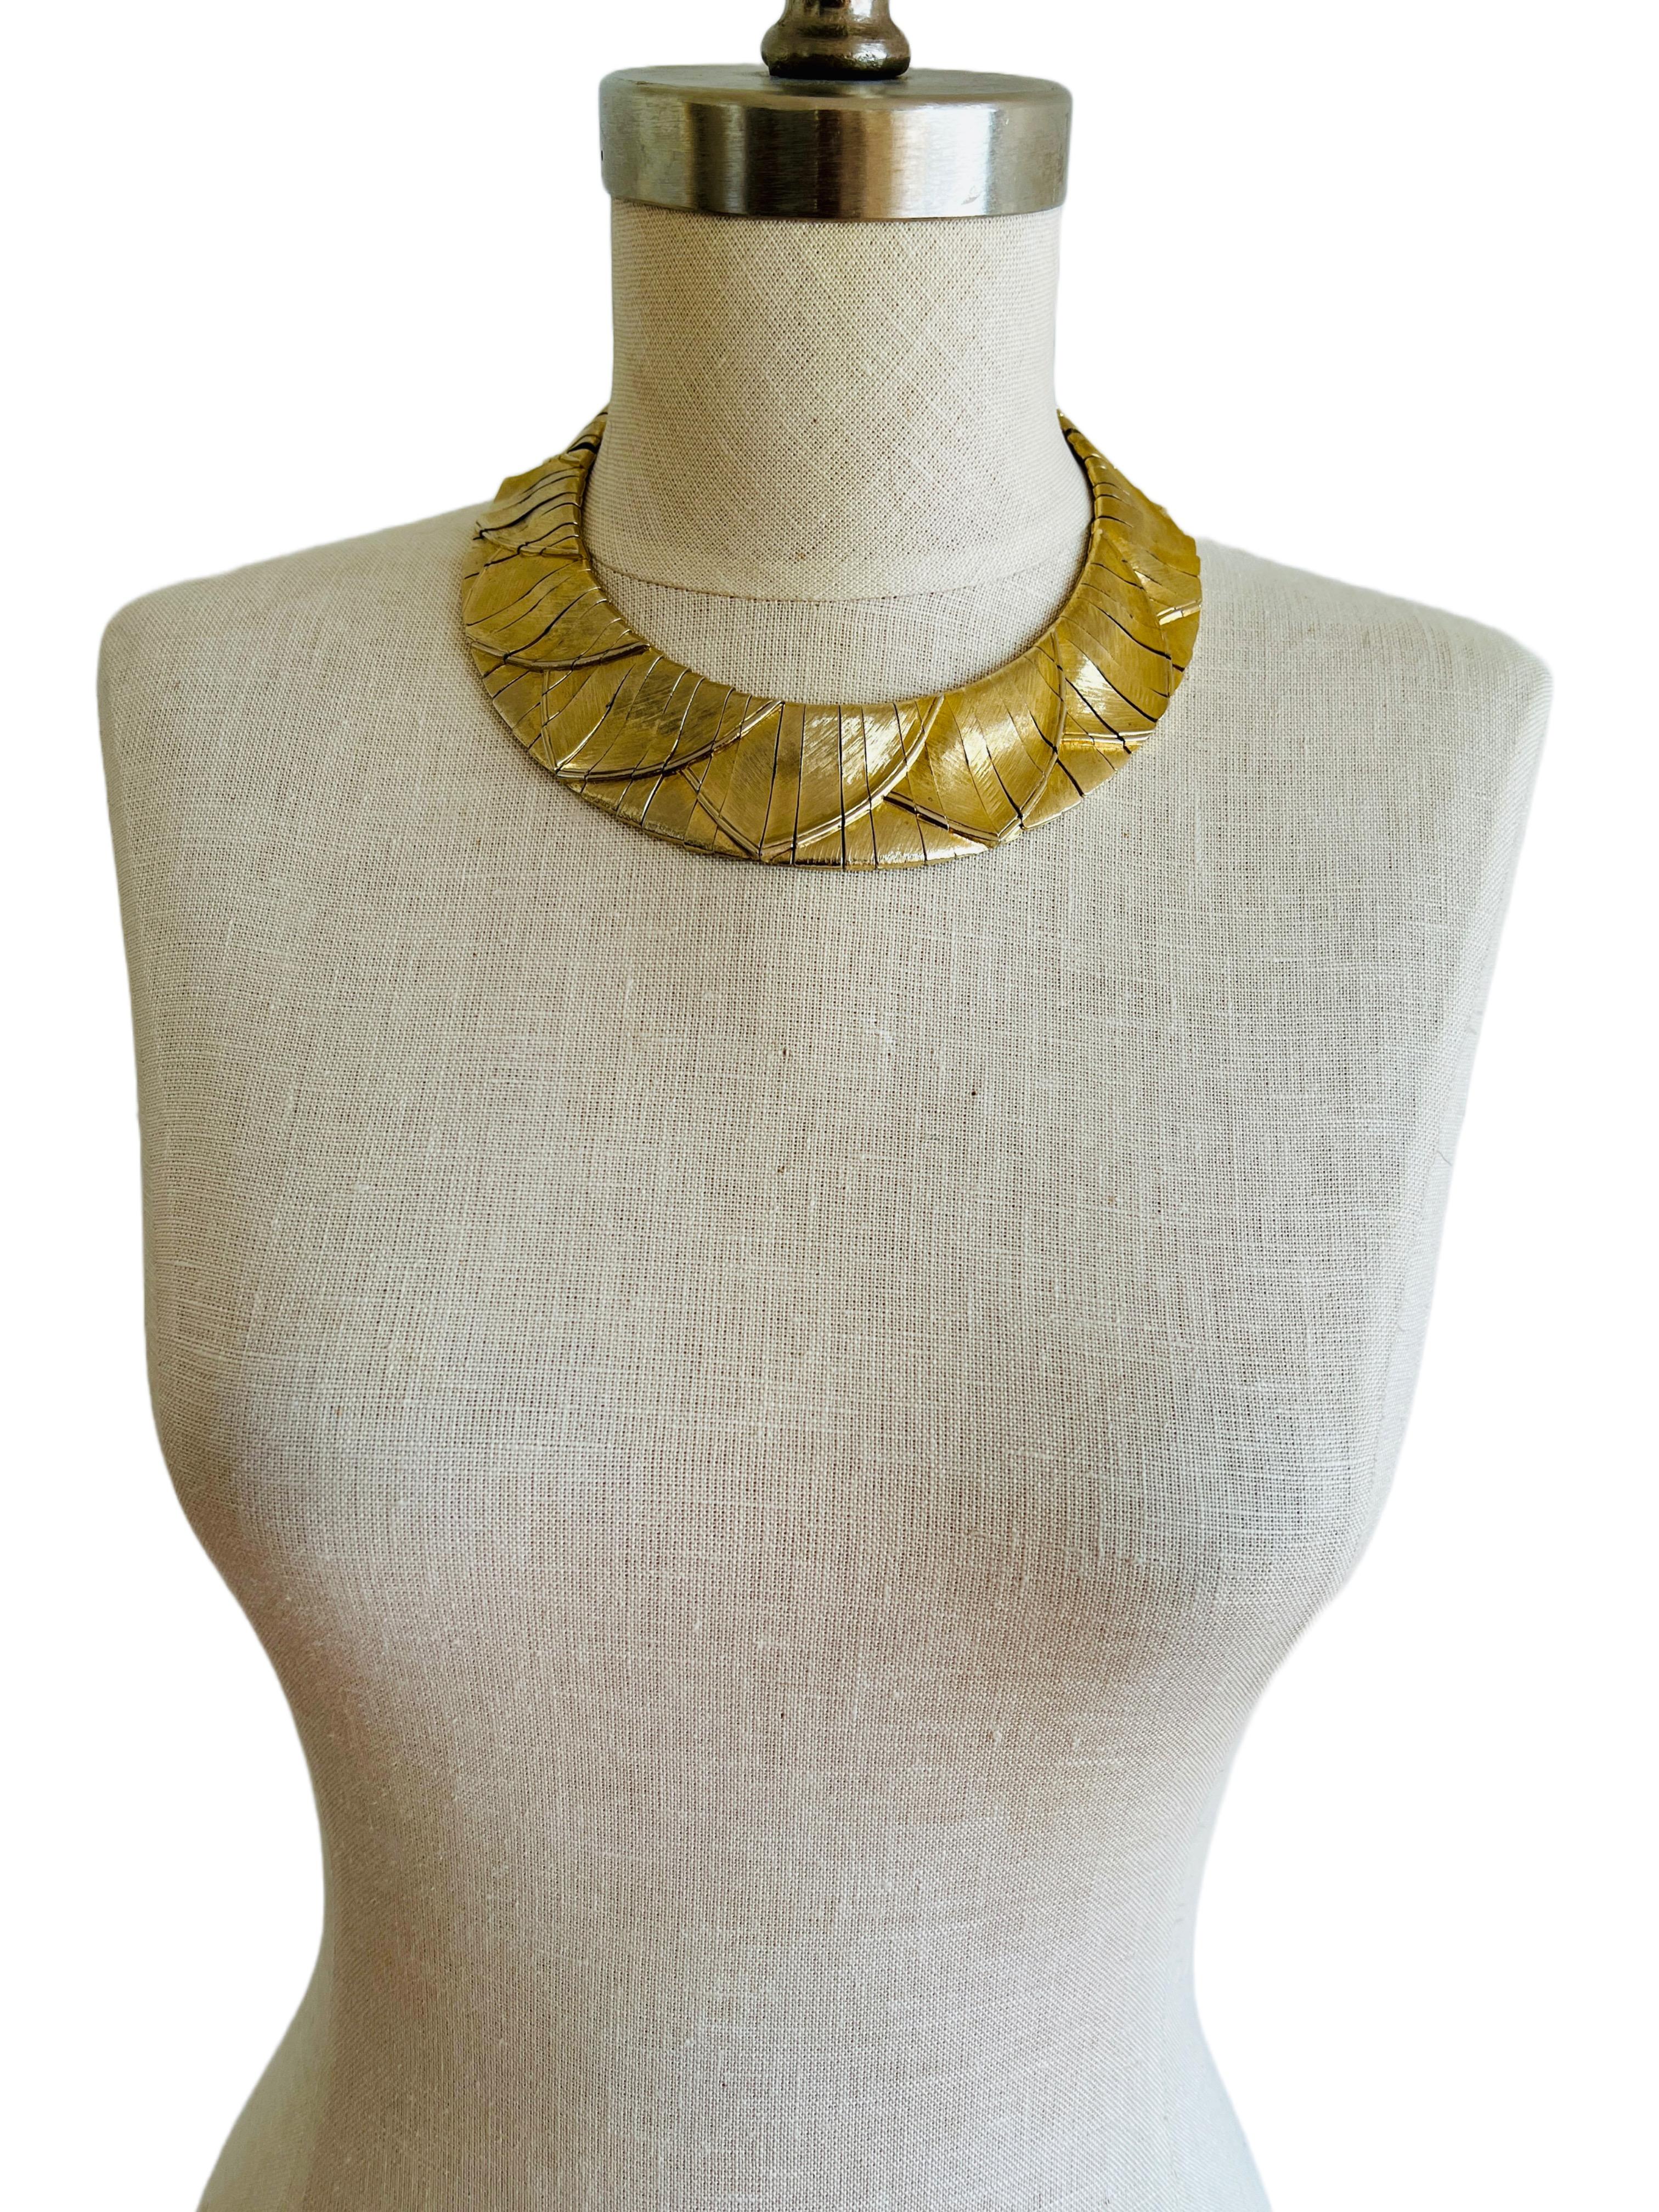 Elegant Les Bernard collar choker necklace, featuring an Egyptian Revival motif in soft pale gold with a brushed finish. Comprised of 68 interconnected segments through an internal chain, this sophisticated accessory is perfect for achieving your